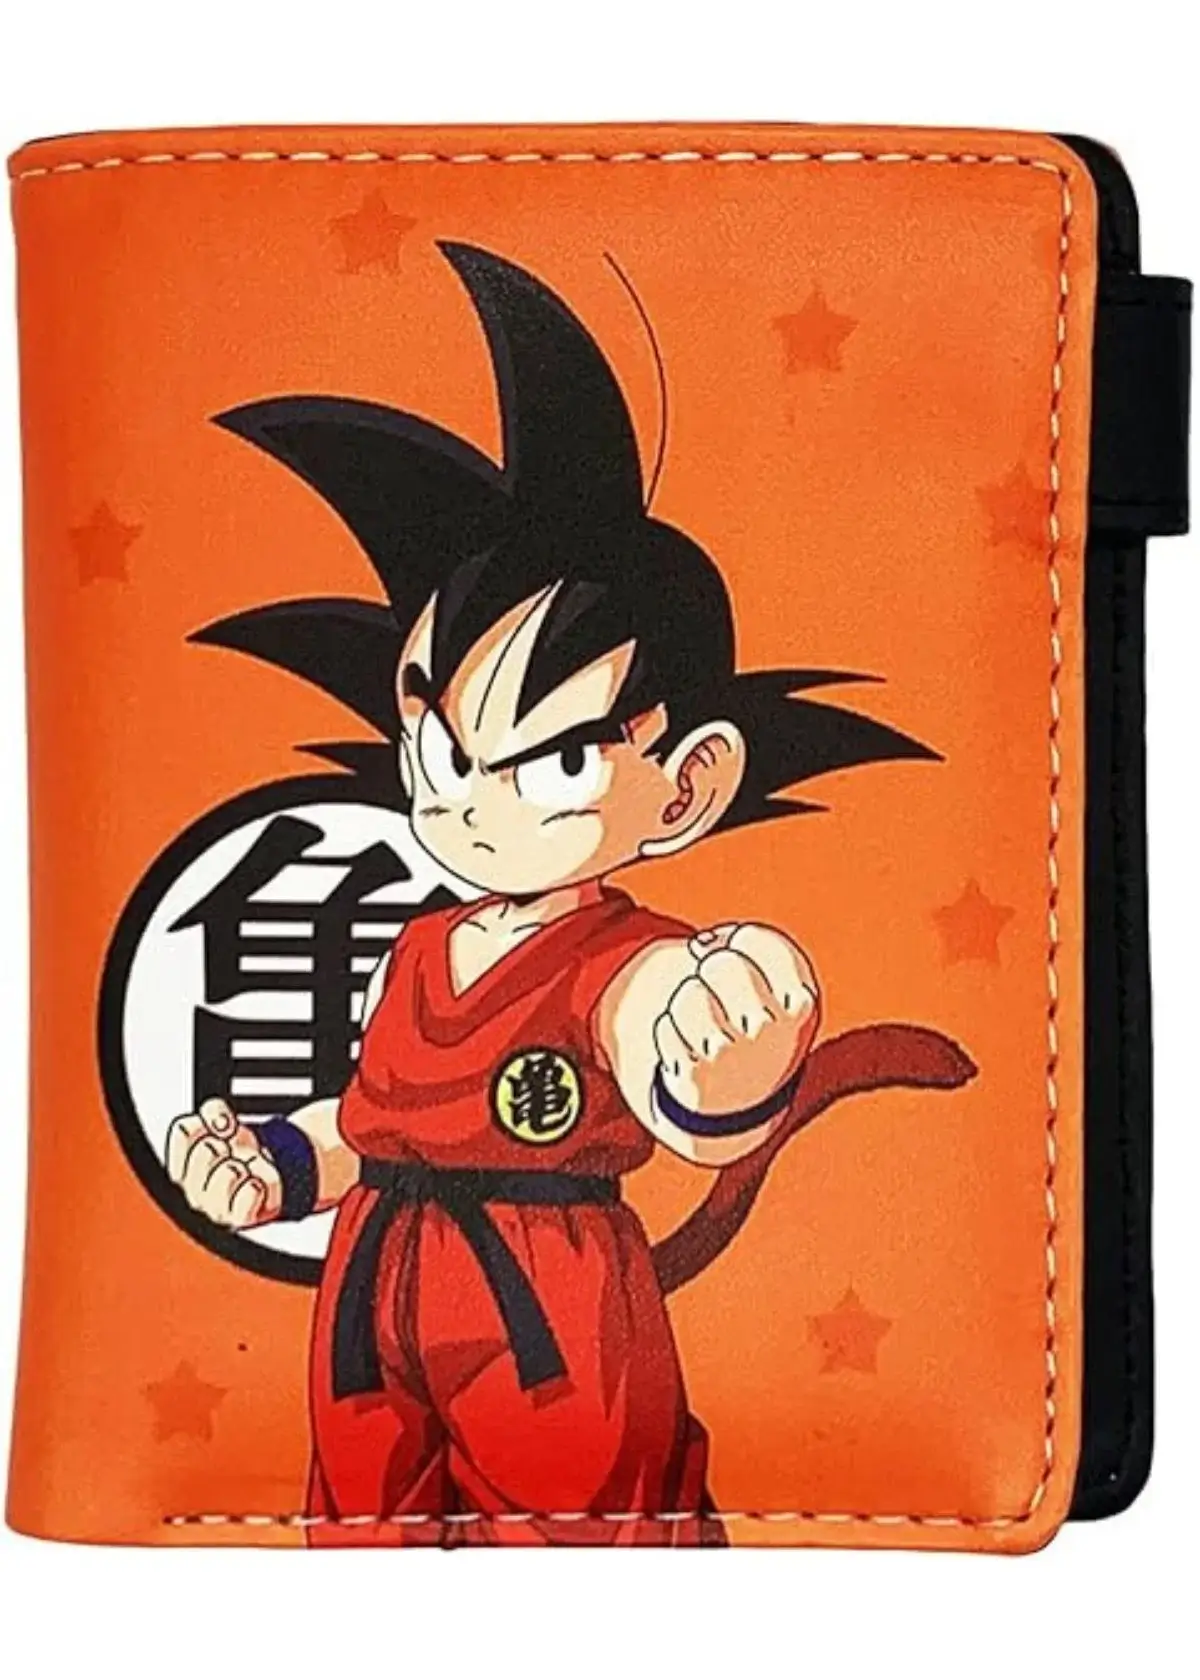 How to choose the right Dragon Ball Z wallet?